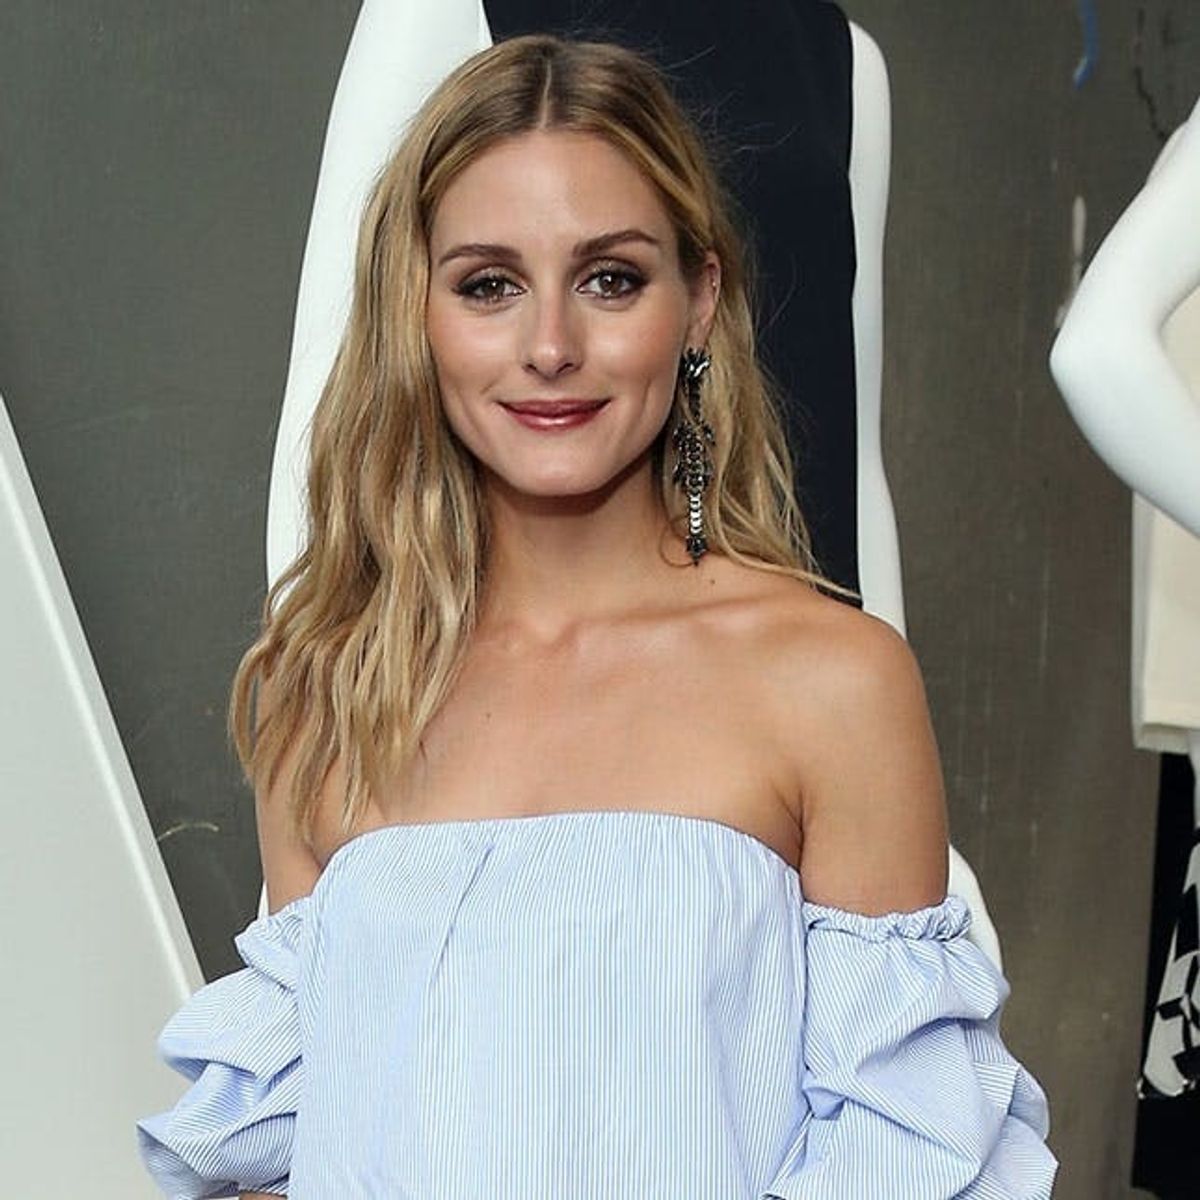 Olivia Palermo Just Made Skinny Jeans Feel SUPER Classy